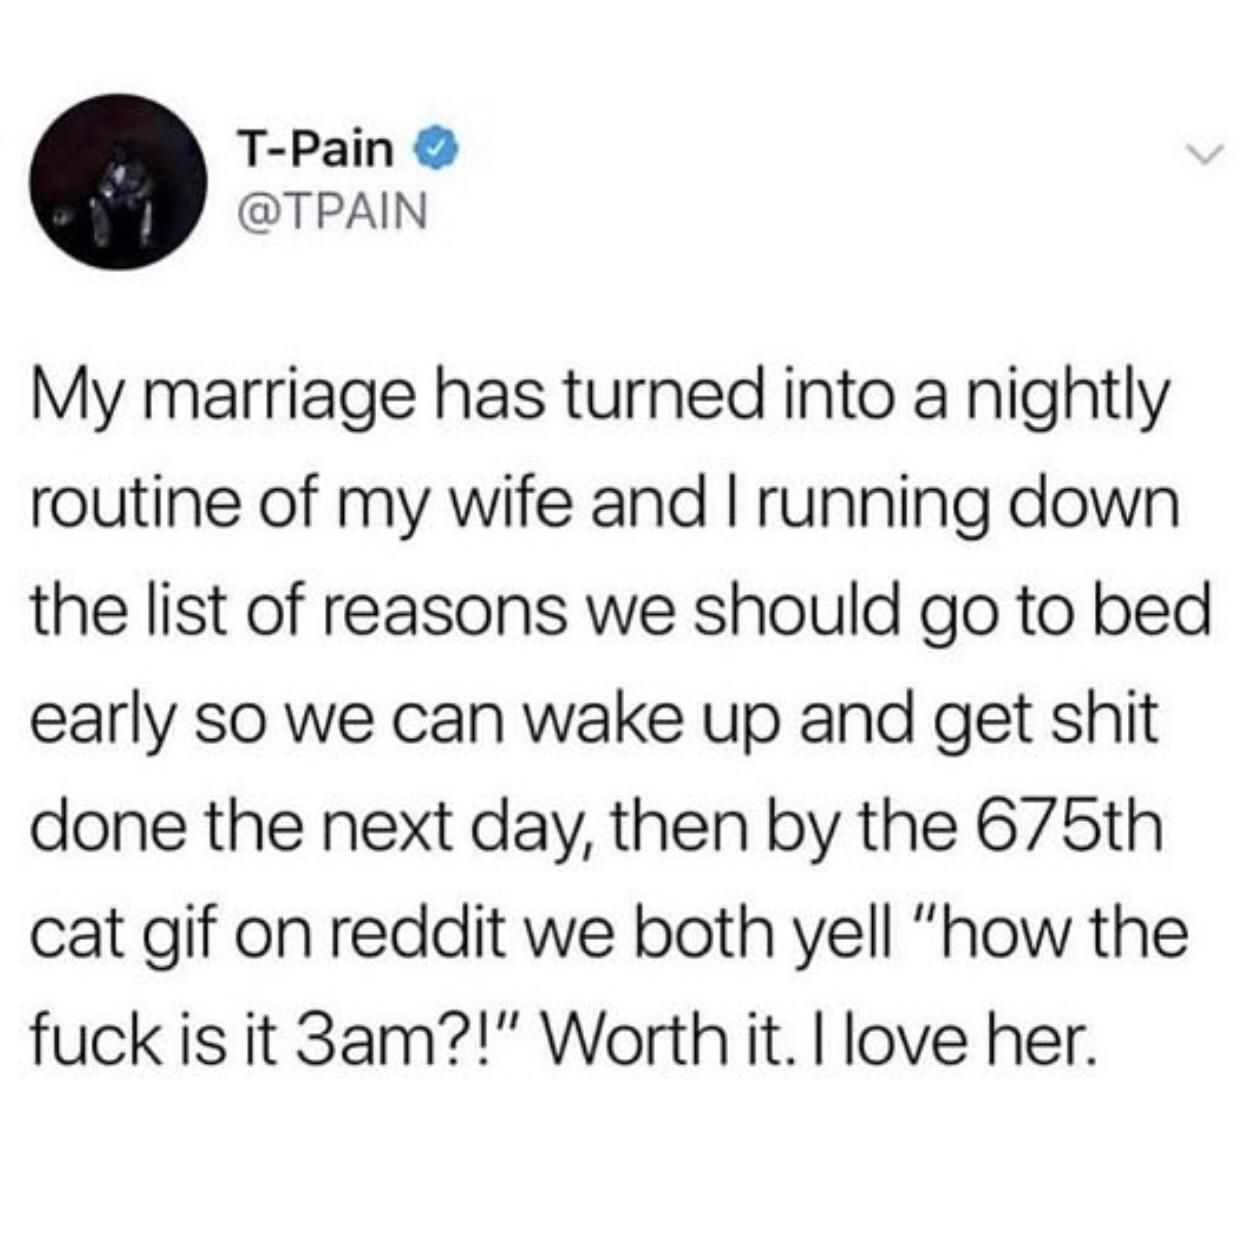 Alright which one of you is T-Pain...